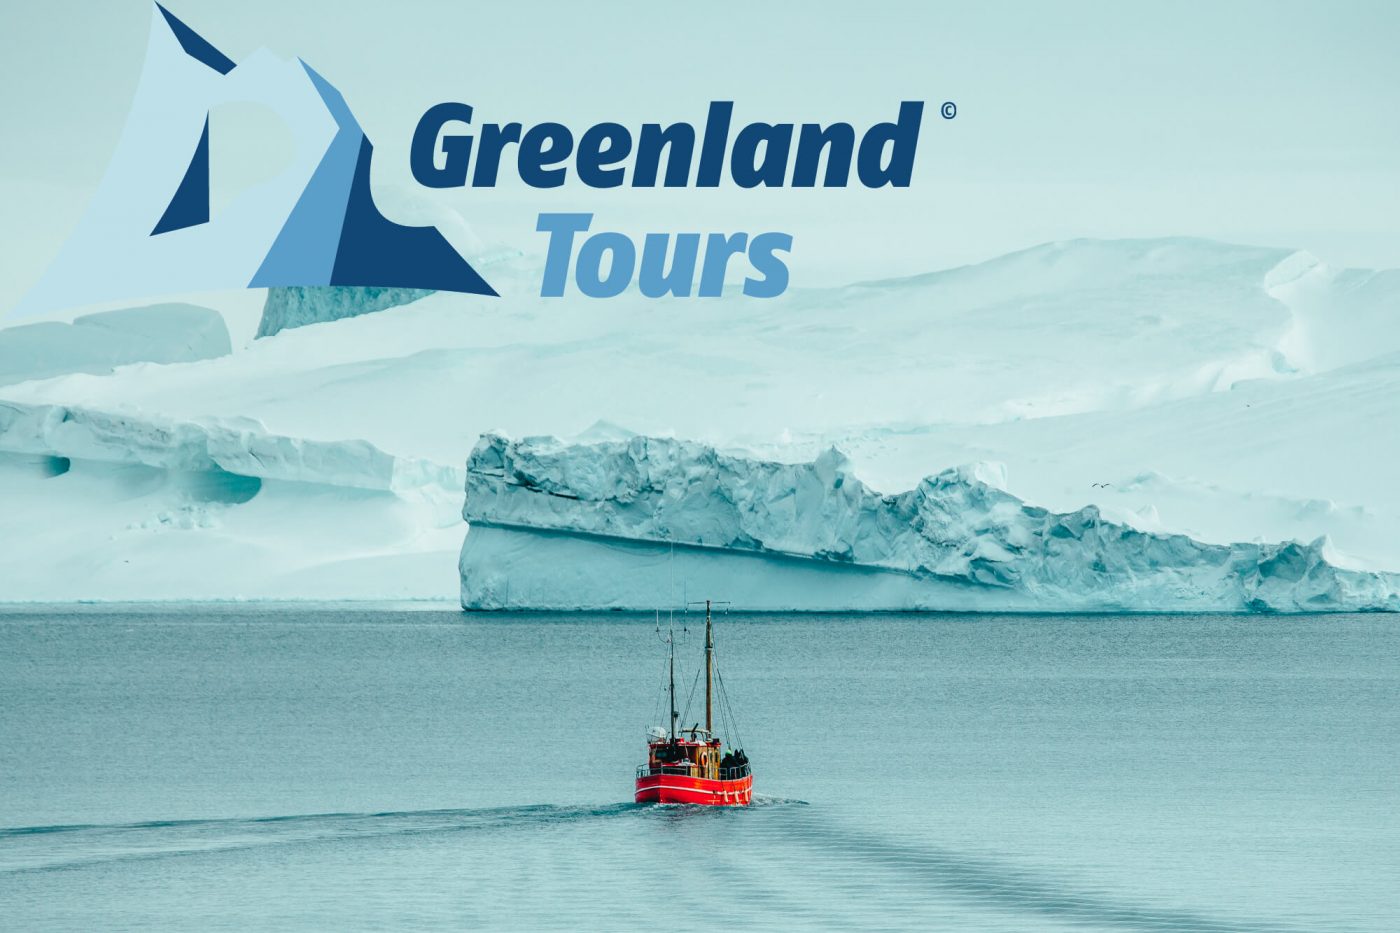 Greenland Tours: Best of the West